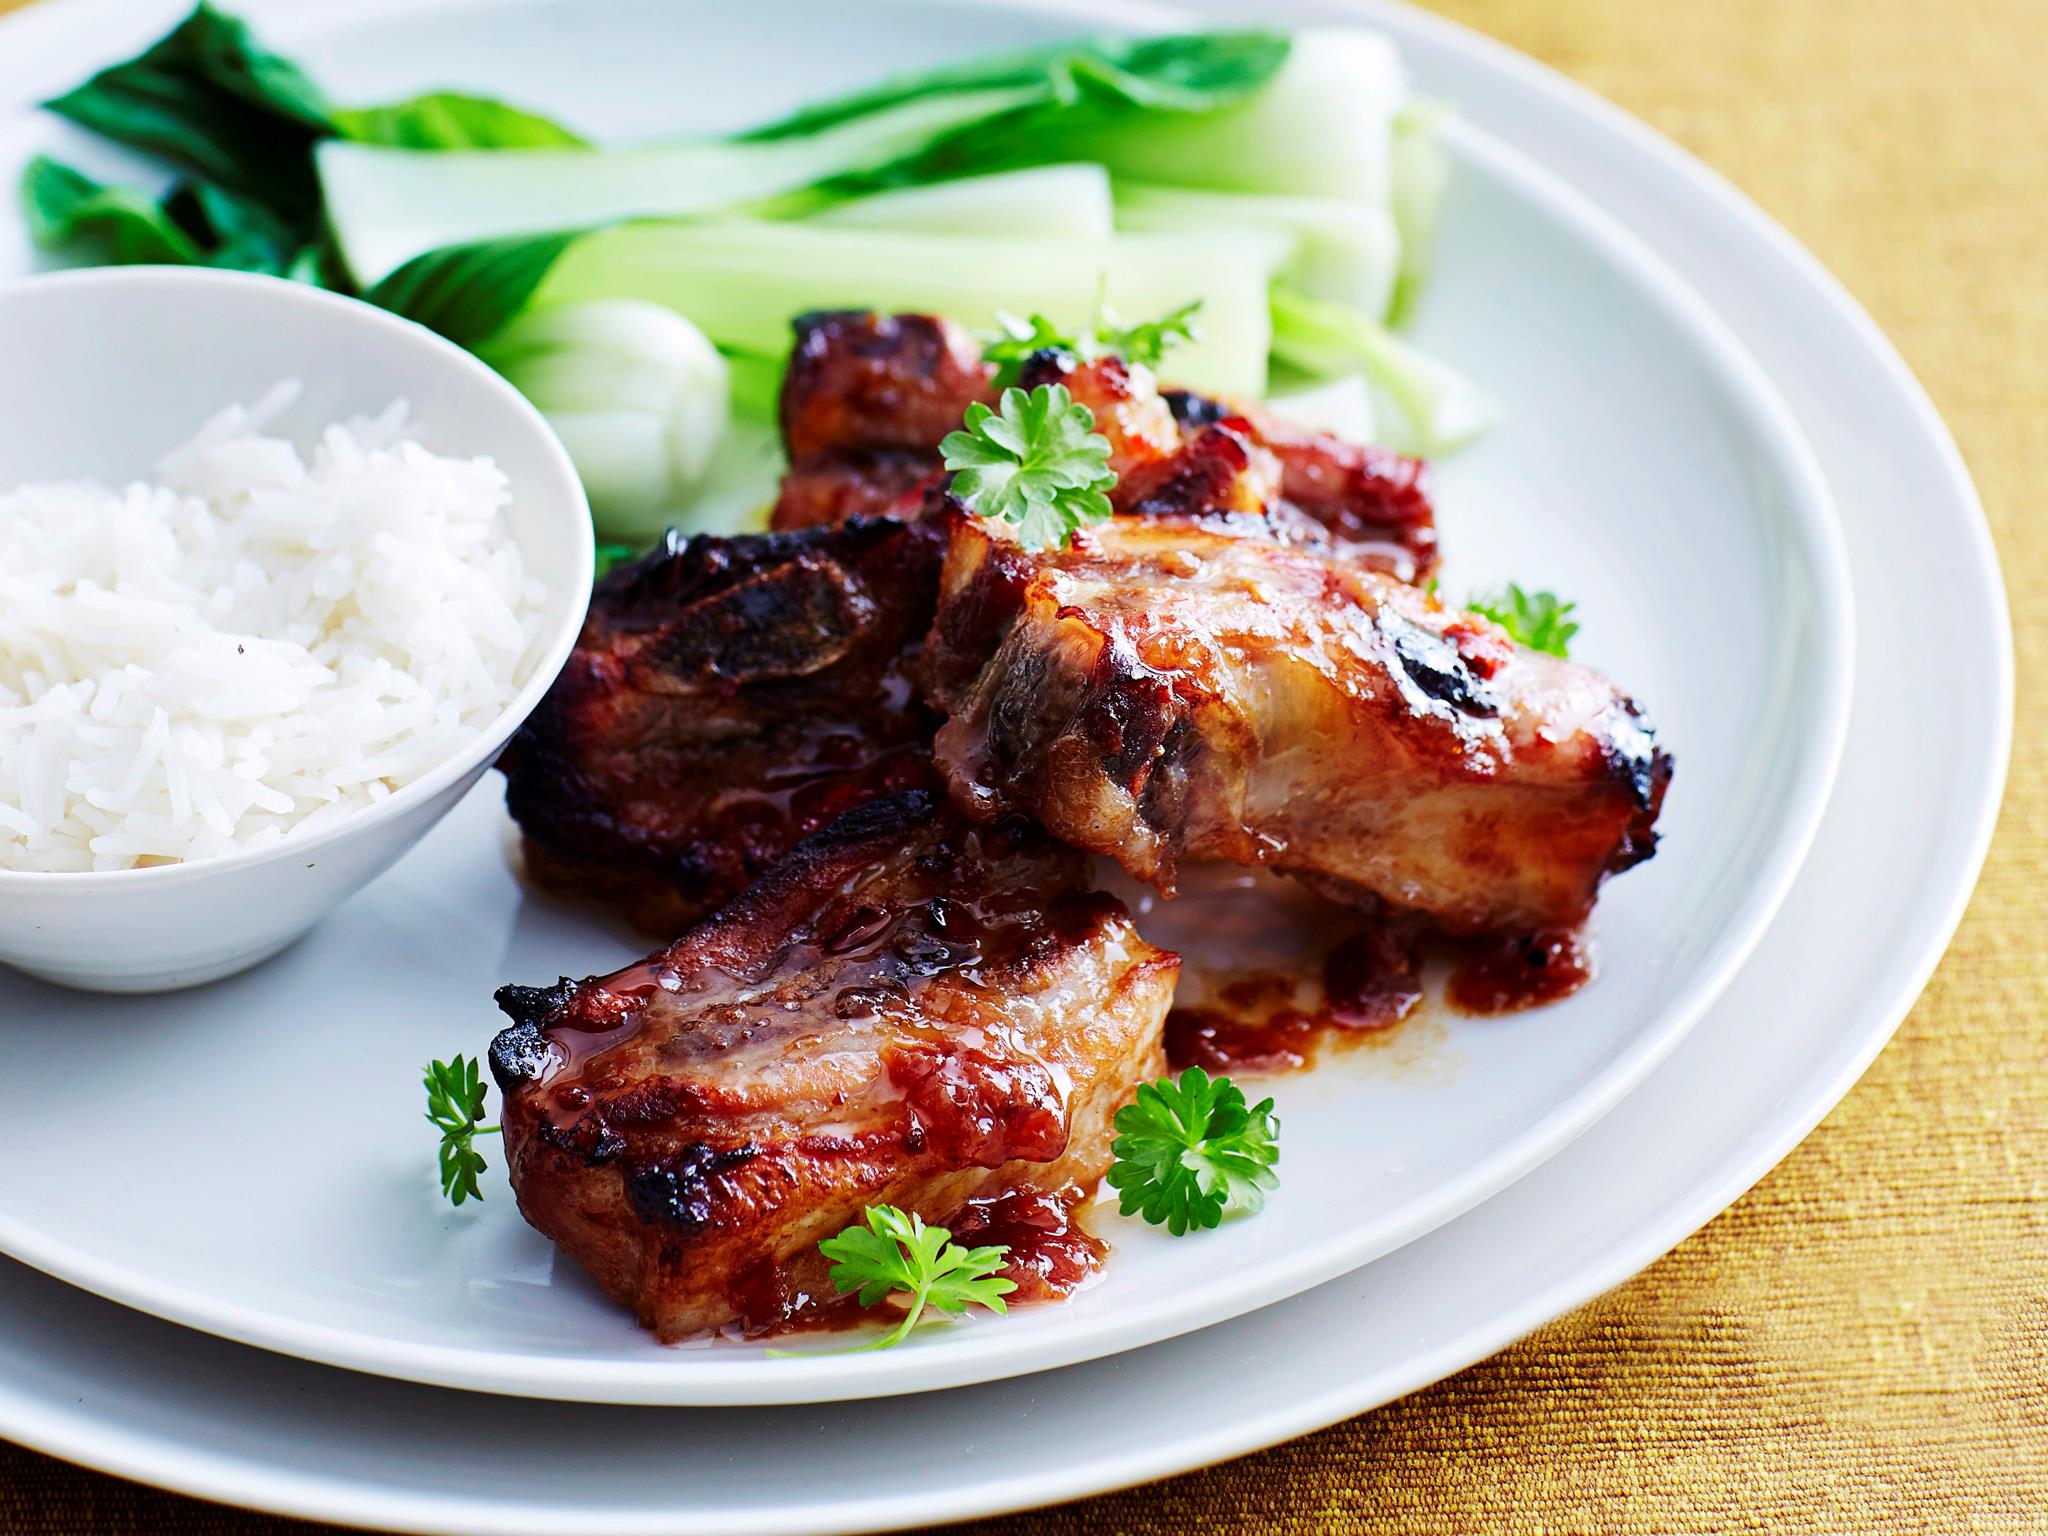 **Pork spare ribs with chilli plum sauce:** Savour these tender, juicy pork ribs, drizzled in Chinese chilli plum sauce and served with steamed rice or Asian greens. **[Get the recipe here.](https://www.womensweeklyfood.com.au/recipes/pork-spare-ribs-with-chilli-plum-sauce-27112|target="_blank")**